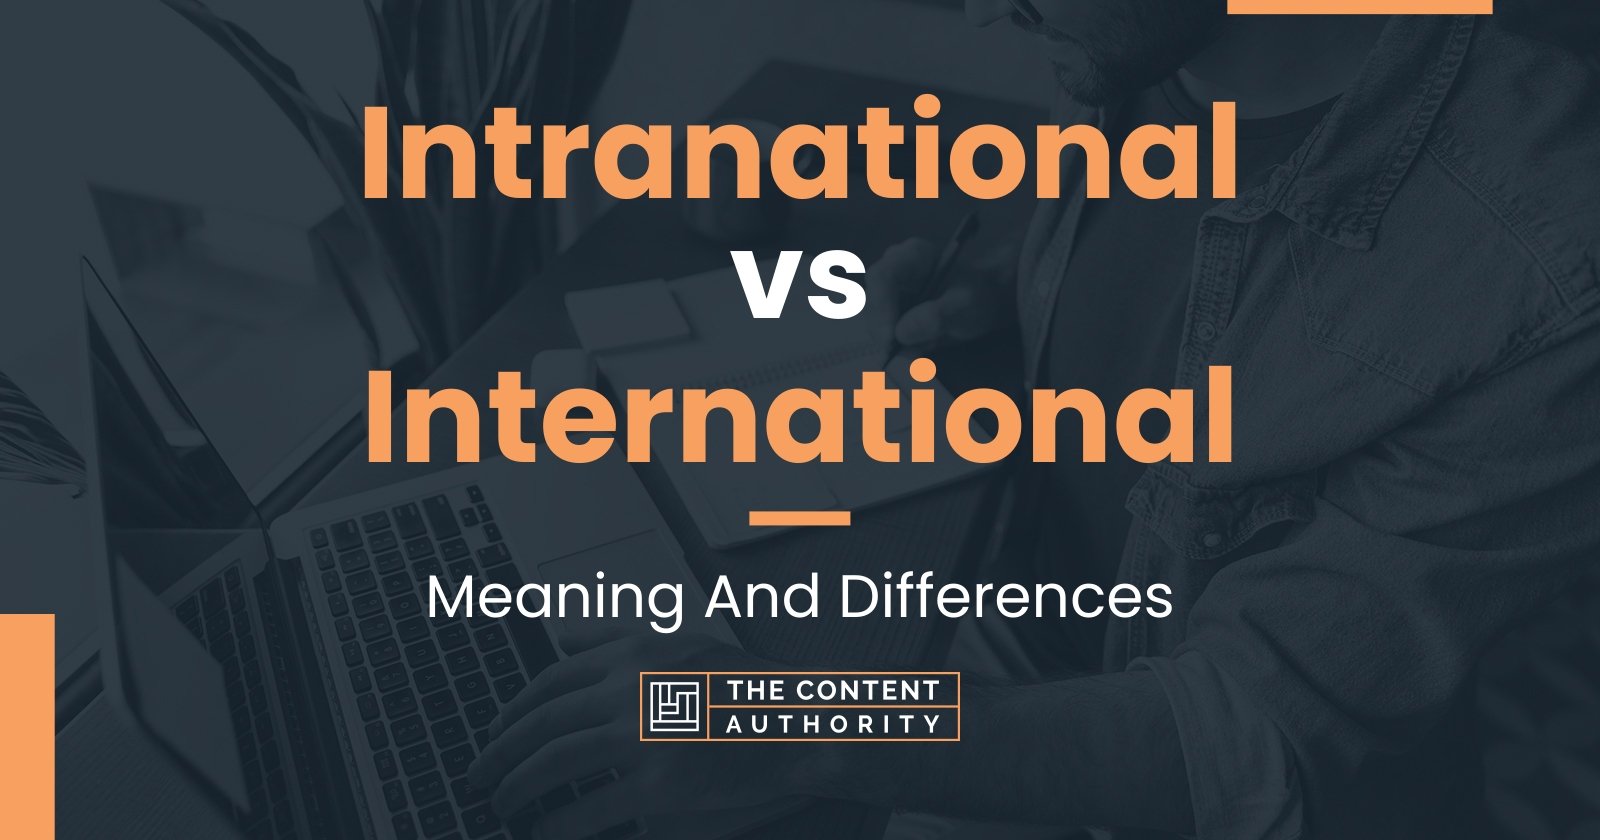 Intranational vs International: Meaning And Differences